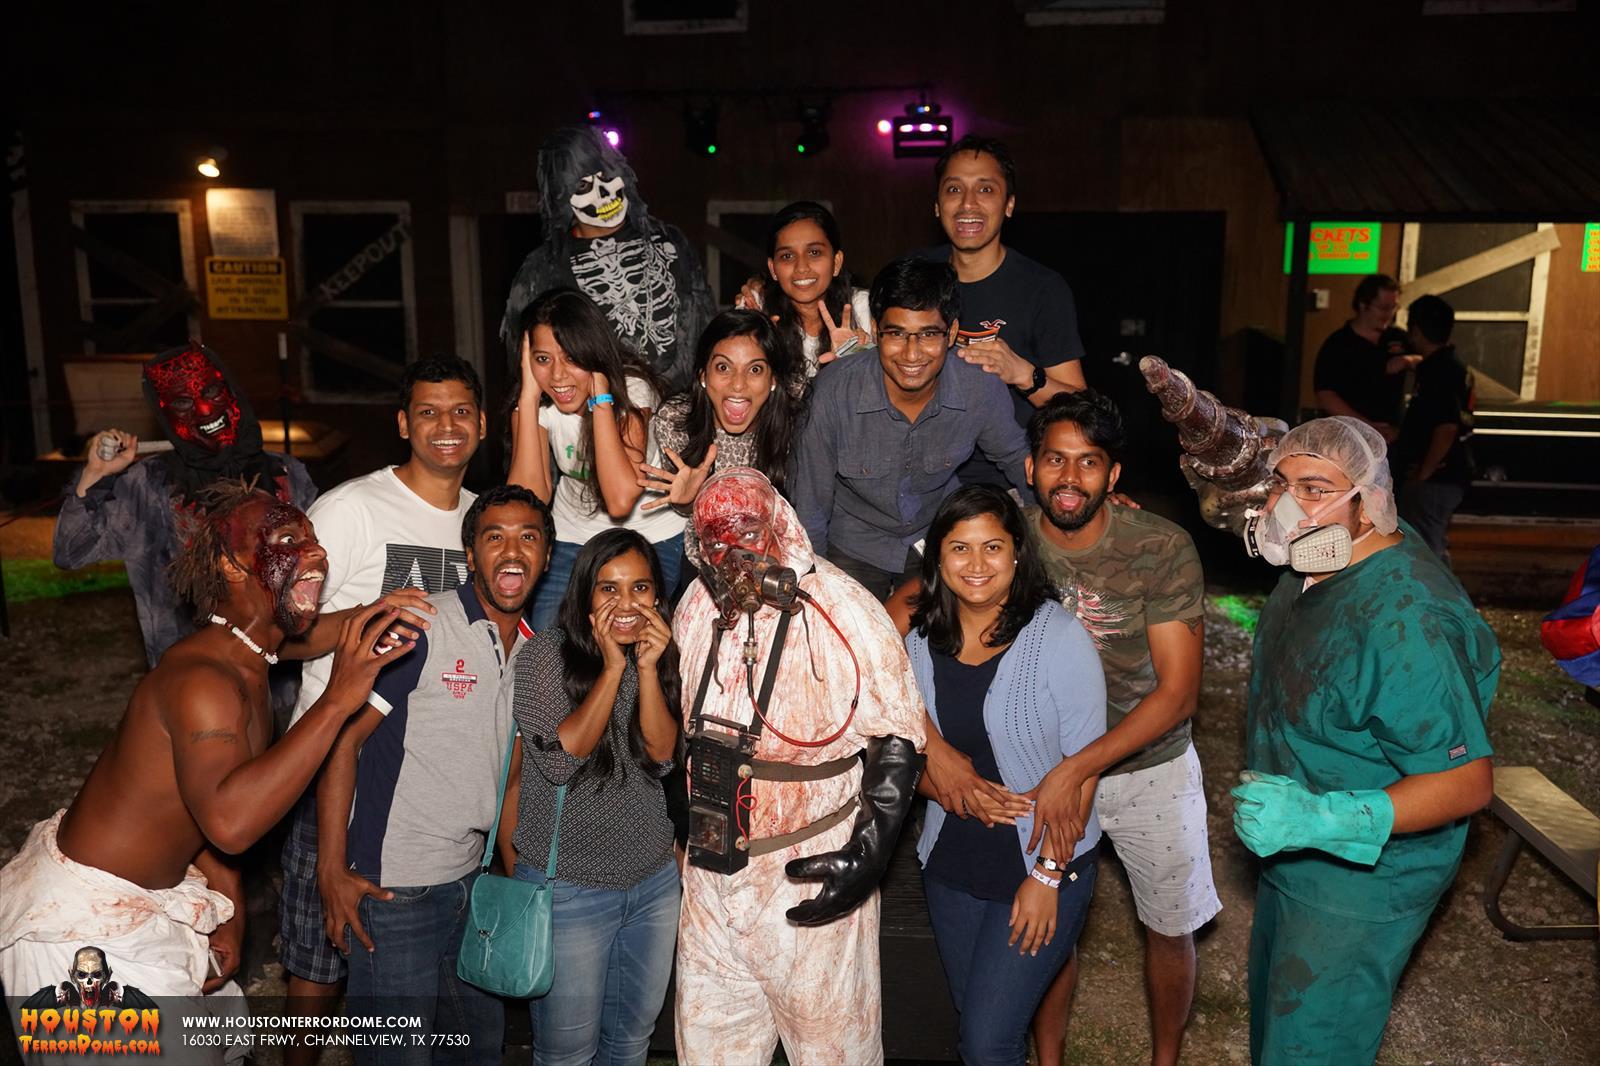 2015 2nd Weekend at Houston Terror Dome Haunted House